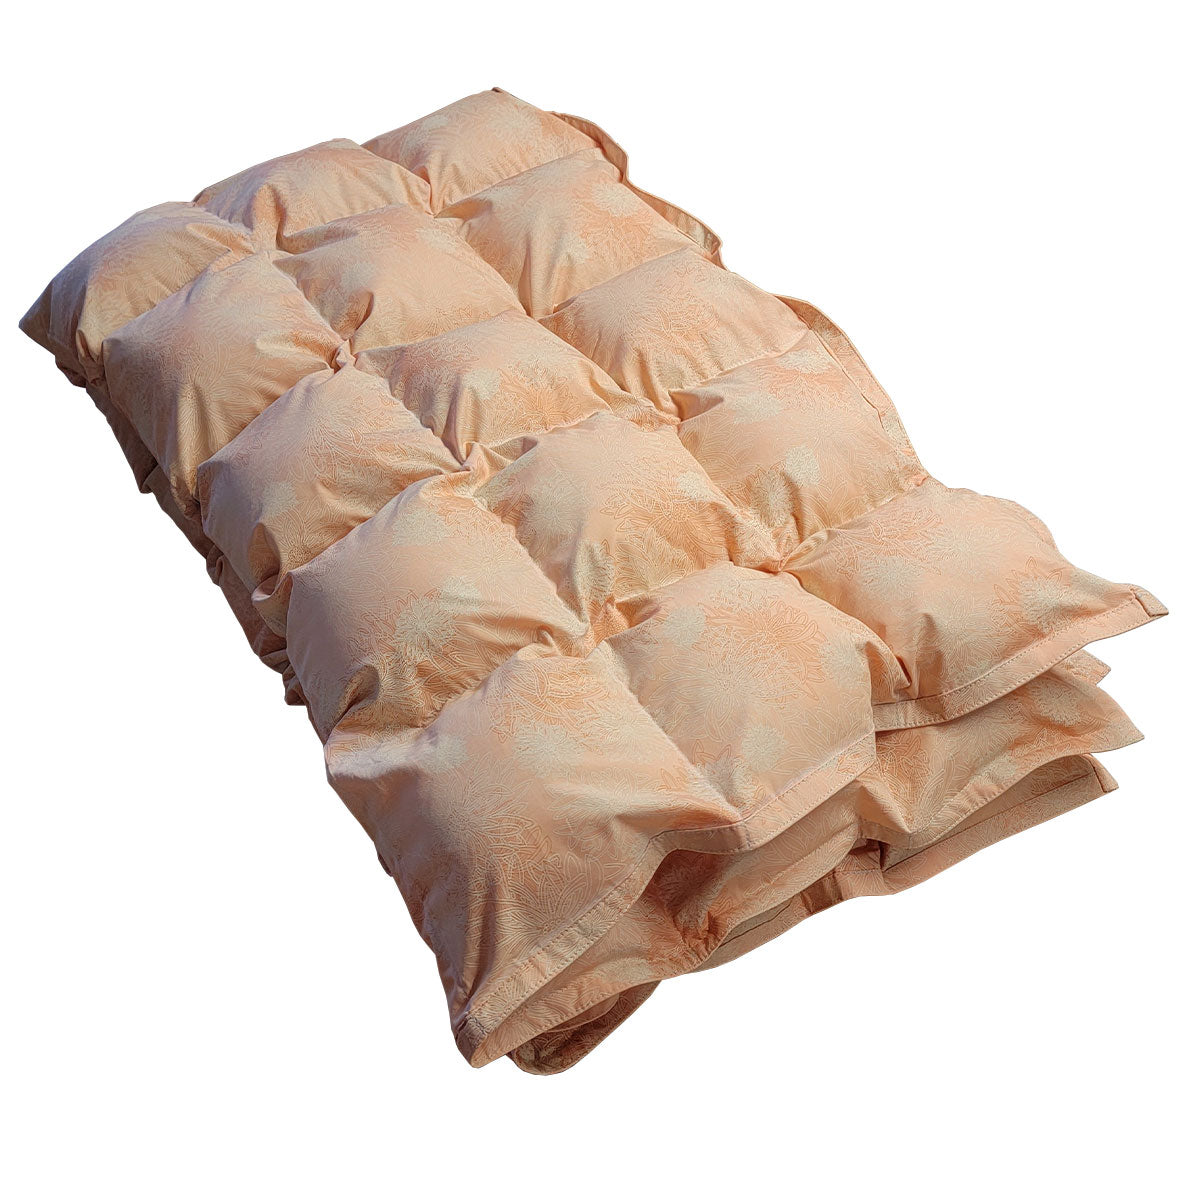 Clearance Weighted Blanket - Medium 8 lb Floral Peach (for 60lb user)